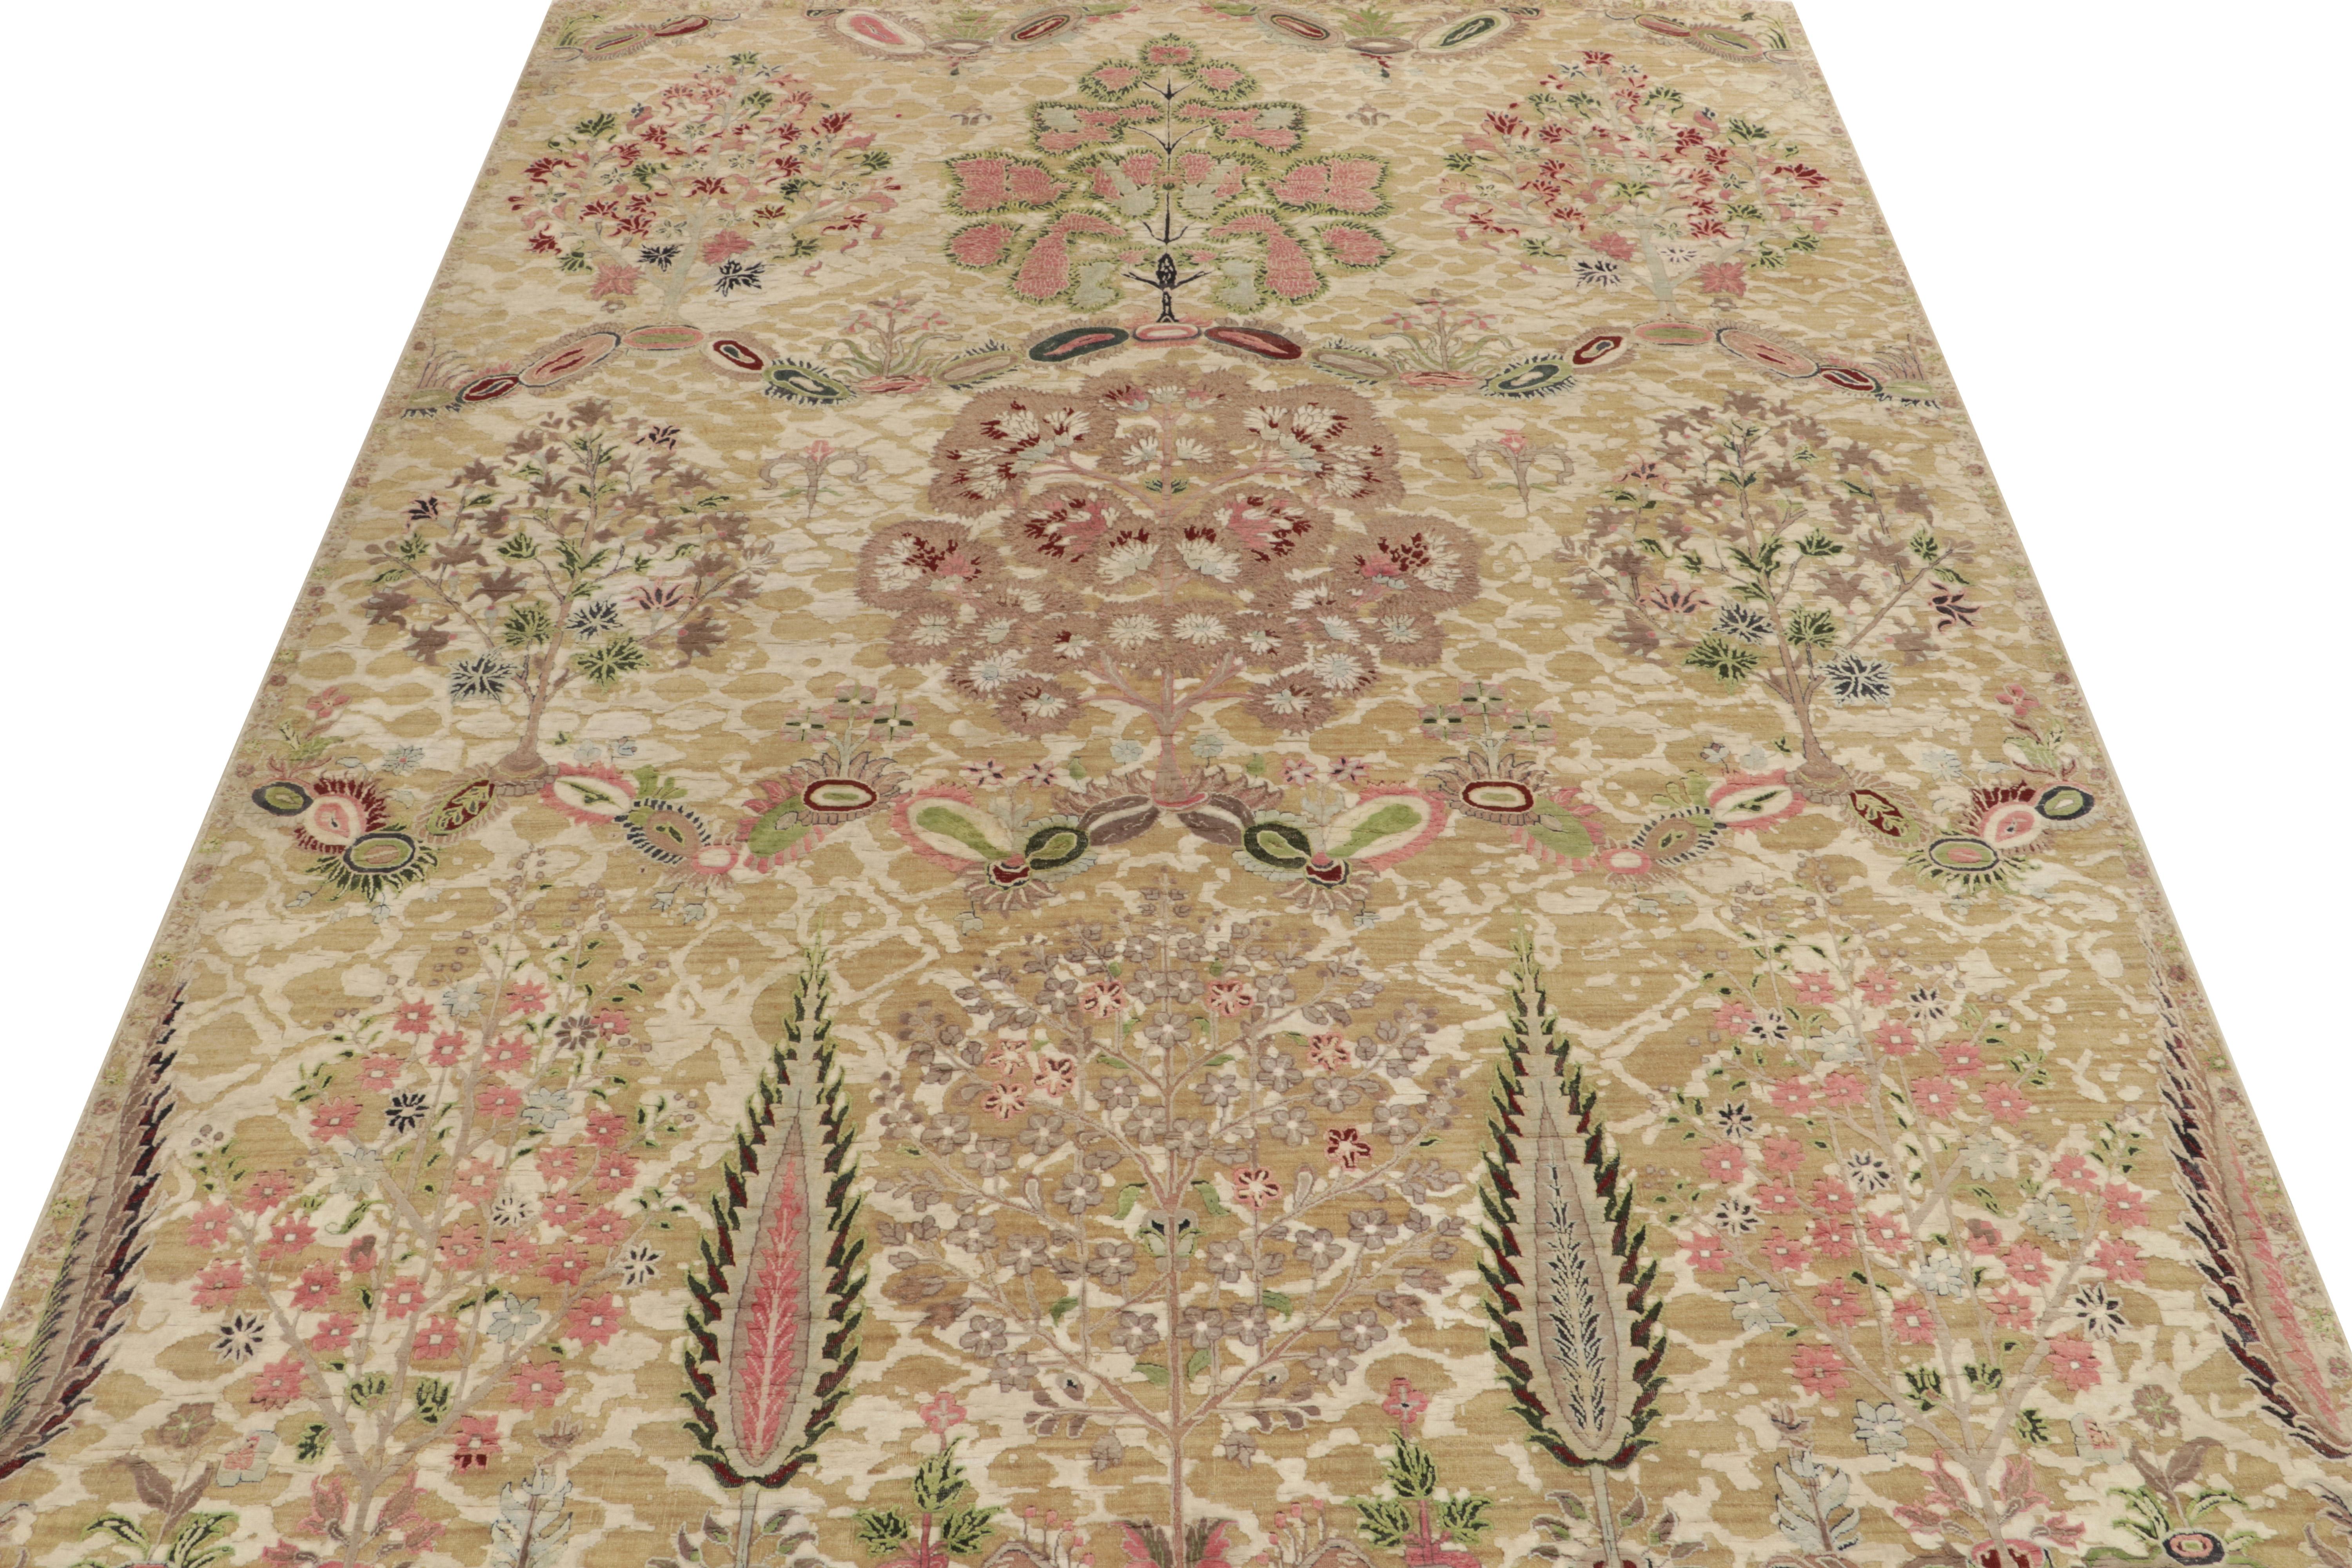 Indian Rug & Kilim’s Classic Style Rug in Green, Pink and Beige-Brown Floral Pattern For Sale